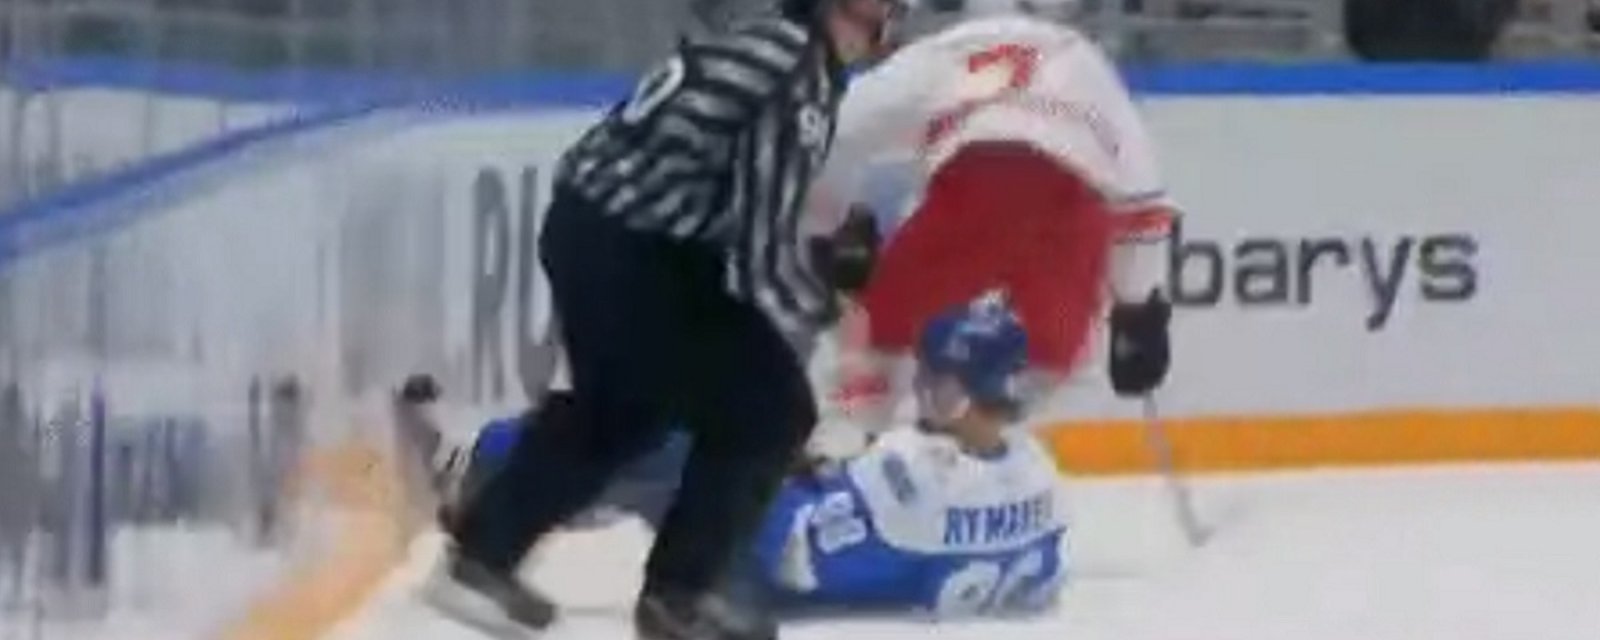 What the hell? KHL linesman delivers a nasty hit to unsuspecting player.